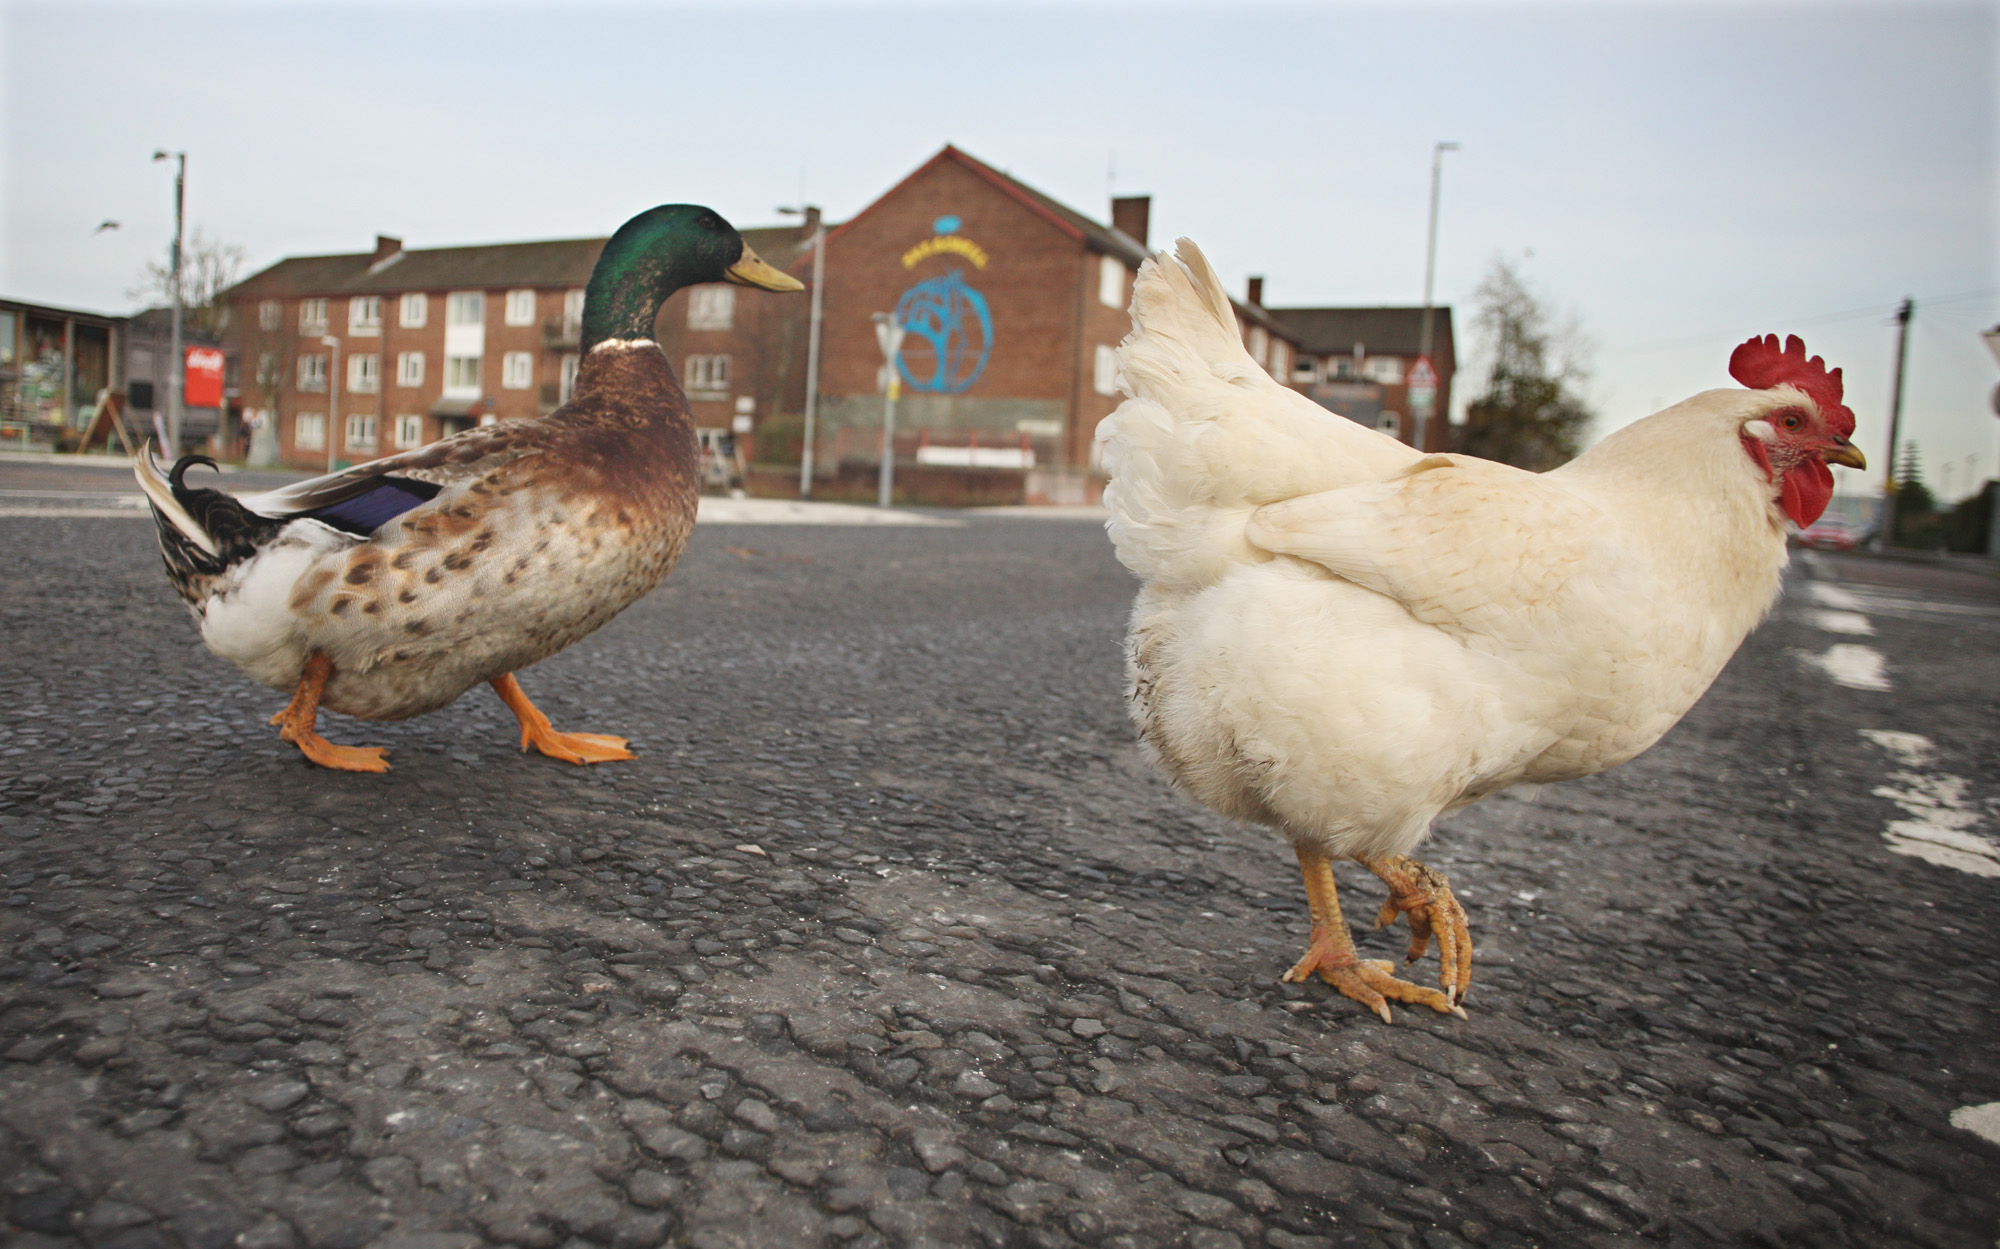 Why did the chicken cross the road? To duck up the side streets, of course. Puddle Duck and Chloe out for their daily dander in Skegoneill Avenue. Chloe is kept by a local family and has struck up an unlikely friendship with the male mallard